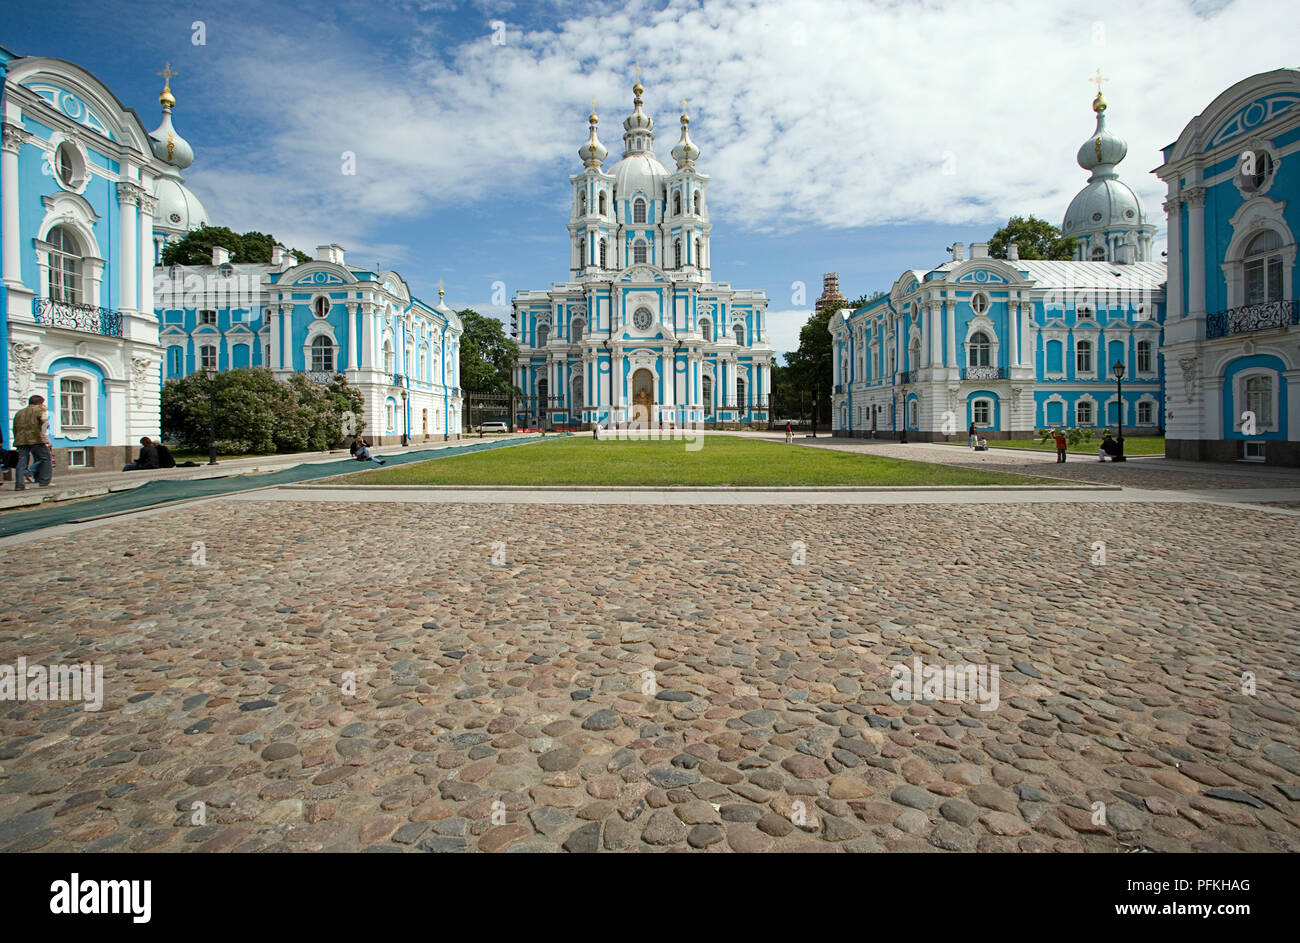 Russia, St Petersburg, blue-and-white facade of Smolny Cathedral, built by Francesco Bartolomeo Rastrelli, with adjacent convent buildings Stock Photo